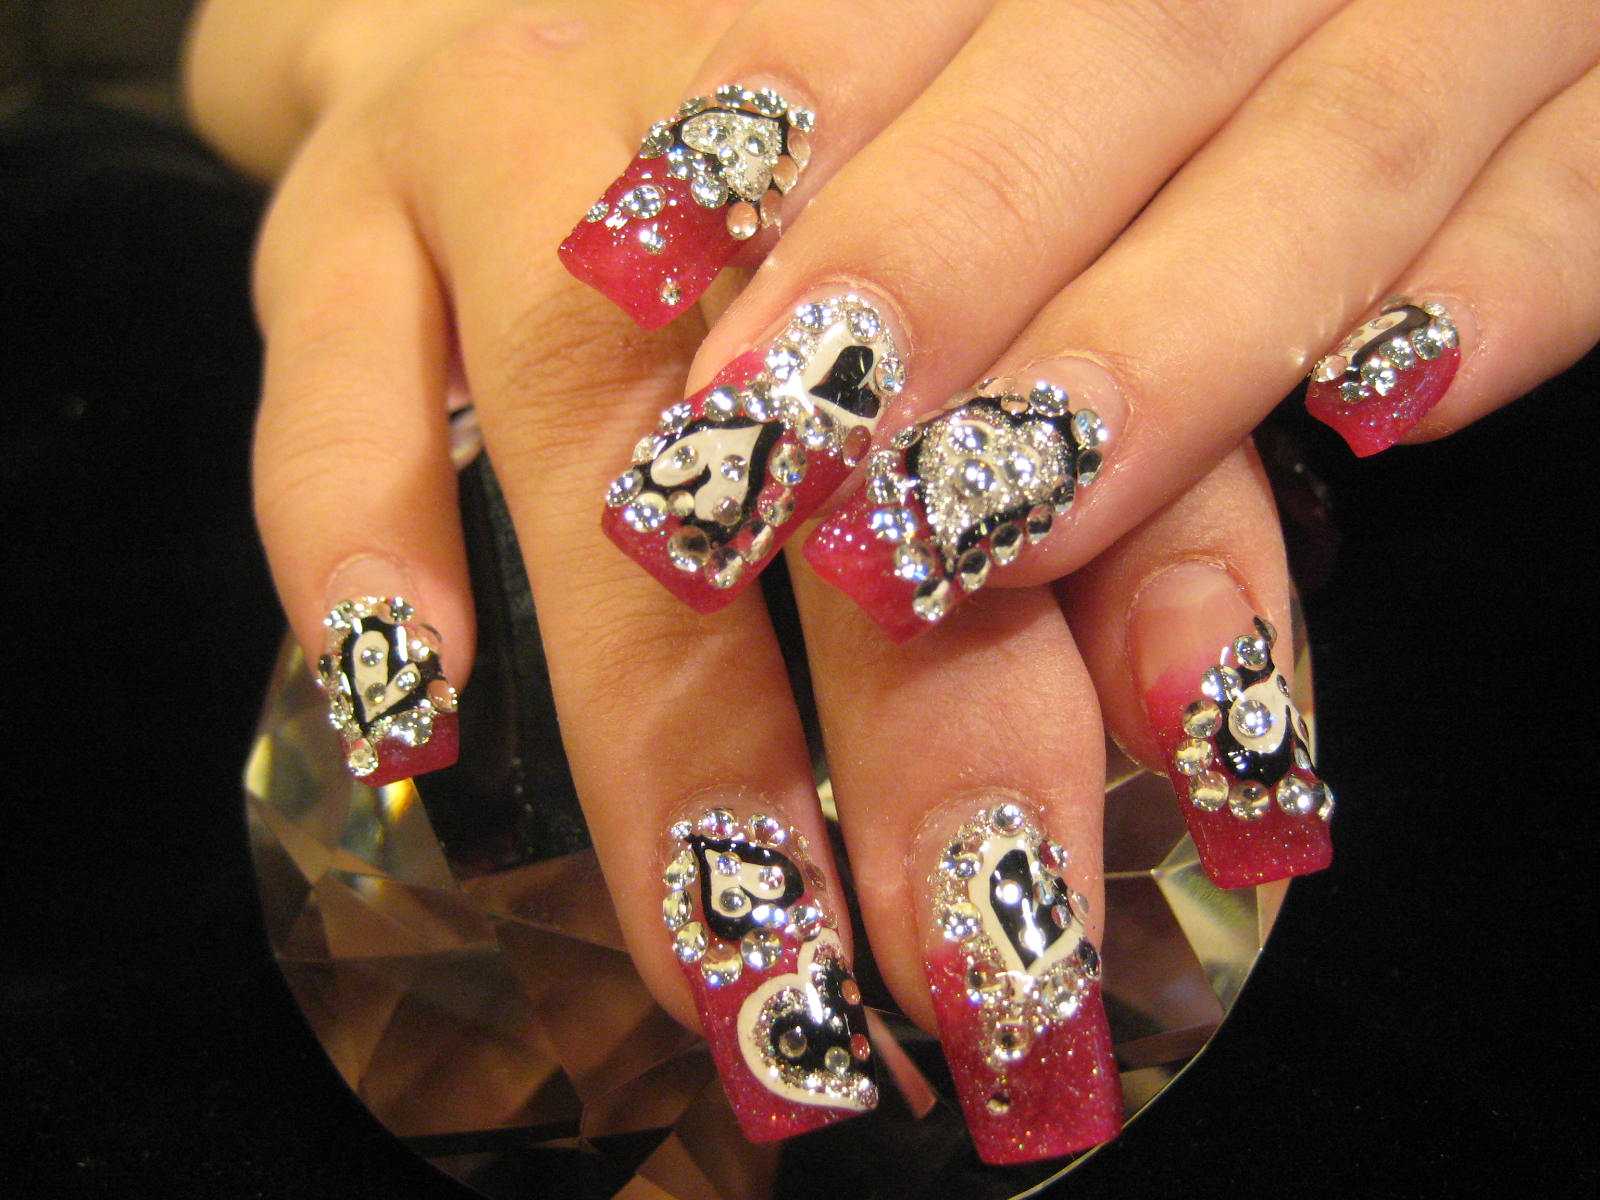 Queen of Hearts Nail Design with Playing Card Symbols - wide 3